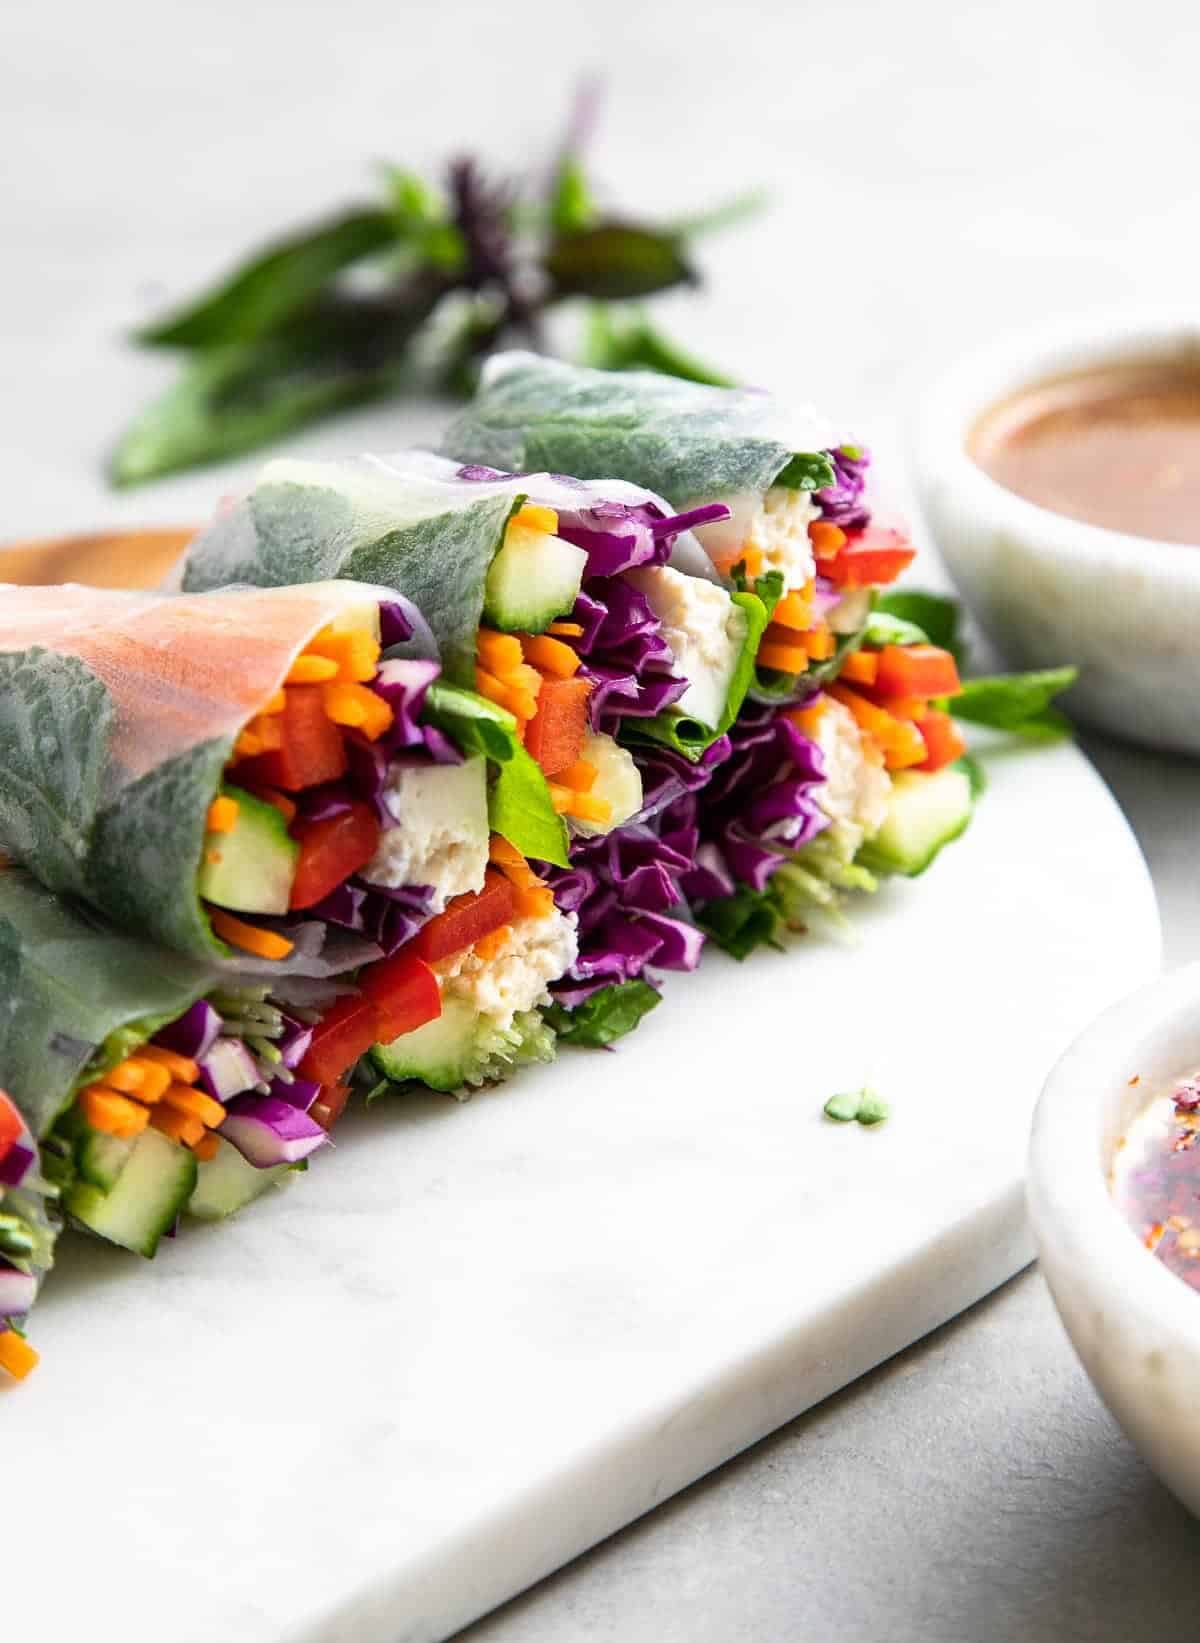 Healthy and Hearty Wraps for Easy Summer Lunches - Goodtaste with Tanji